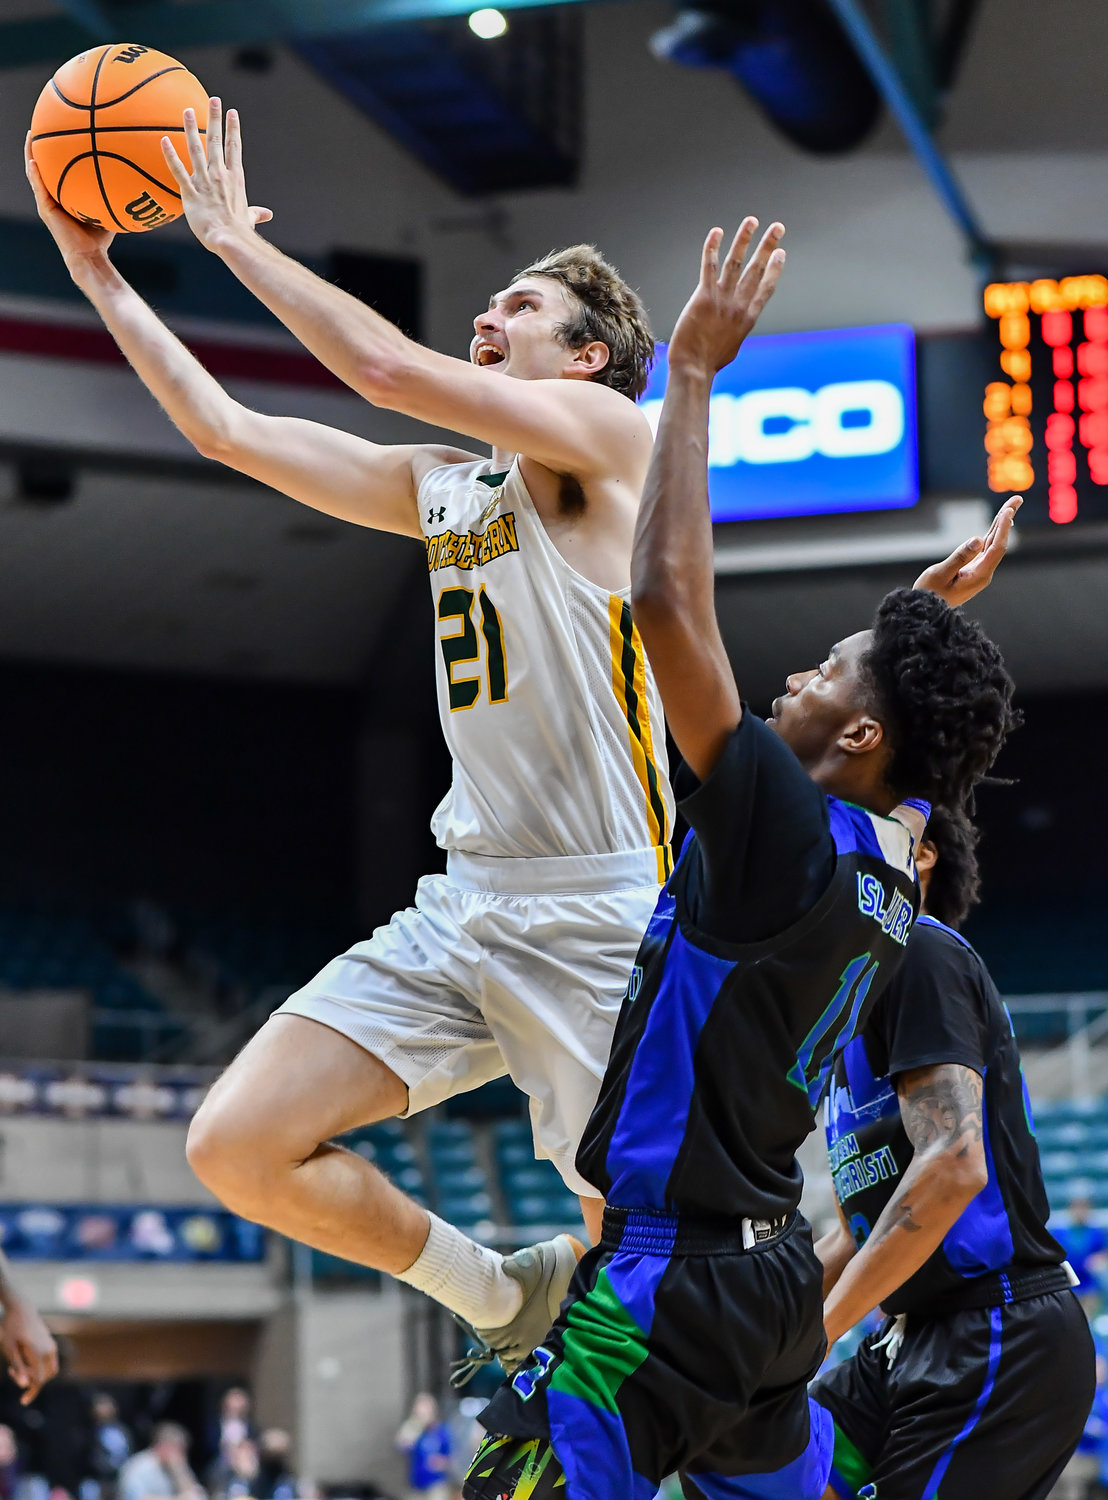 March 12,, 2022:  Southeastern Louisianas Ryan Burkhardt #21 drives up to the basket during the Southland Conference Basketball Championship game between A&M Corpus Christi vs Southeastern Louisiana. (Photo by Mark Goodman / Katy Times)